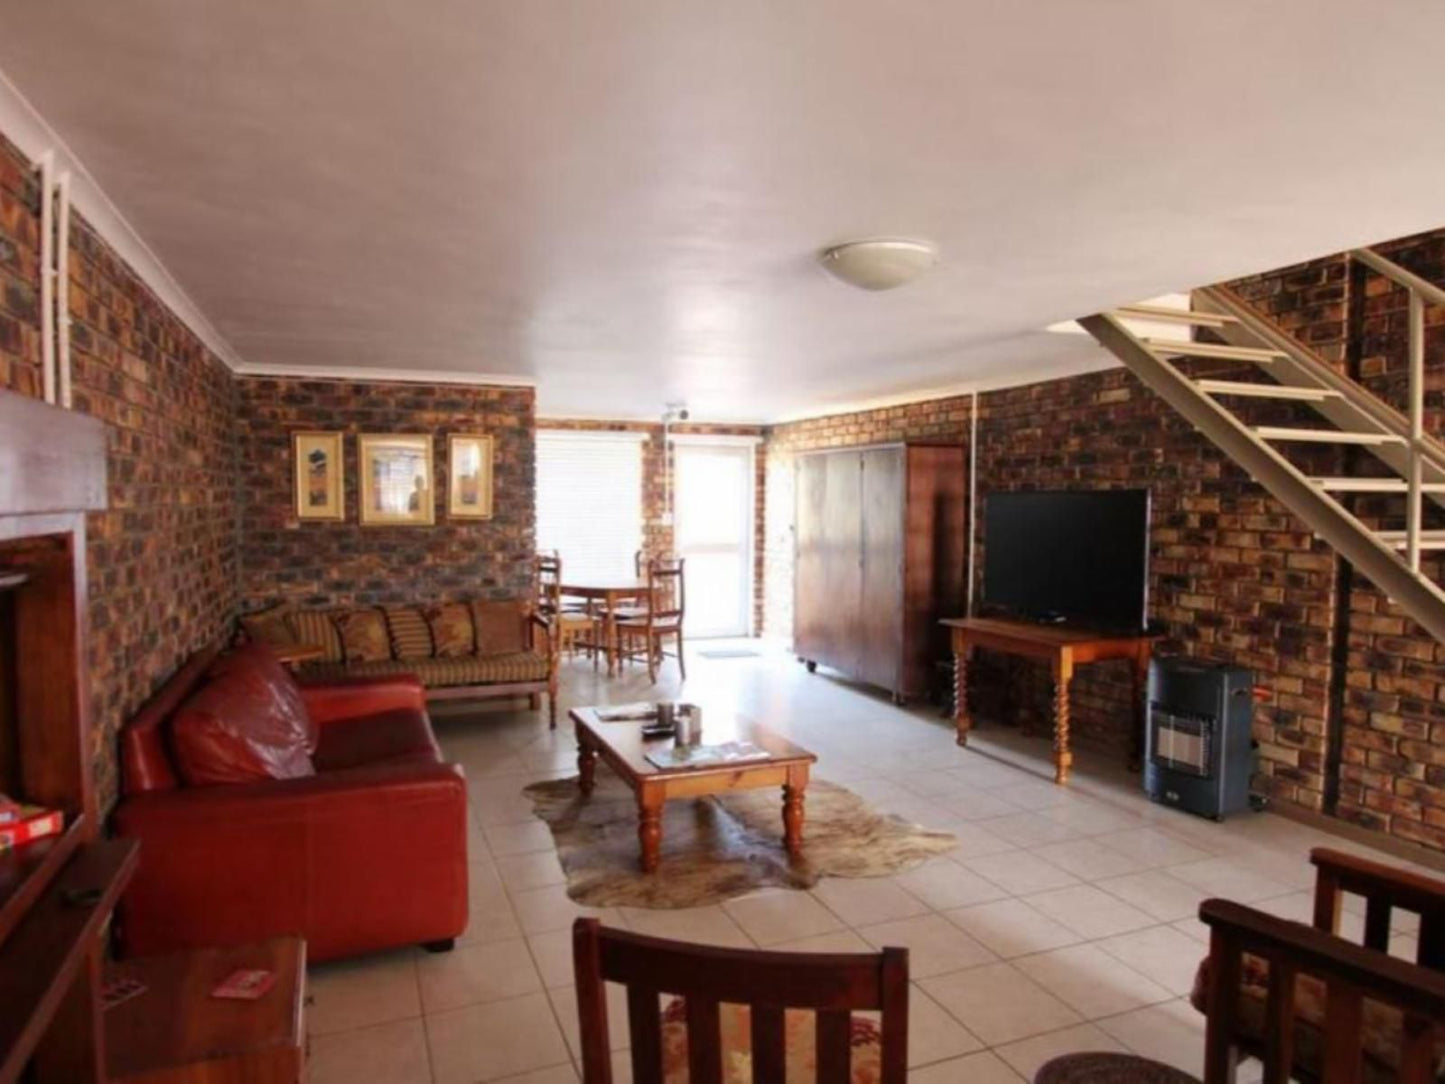 Clanwilliam Accommodation Clanwilliam Western Cape South Africa Living Room